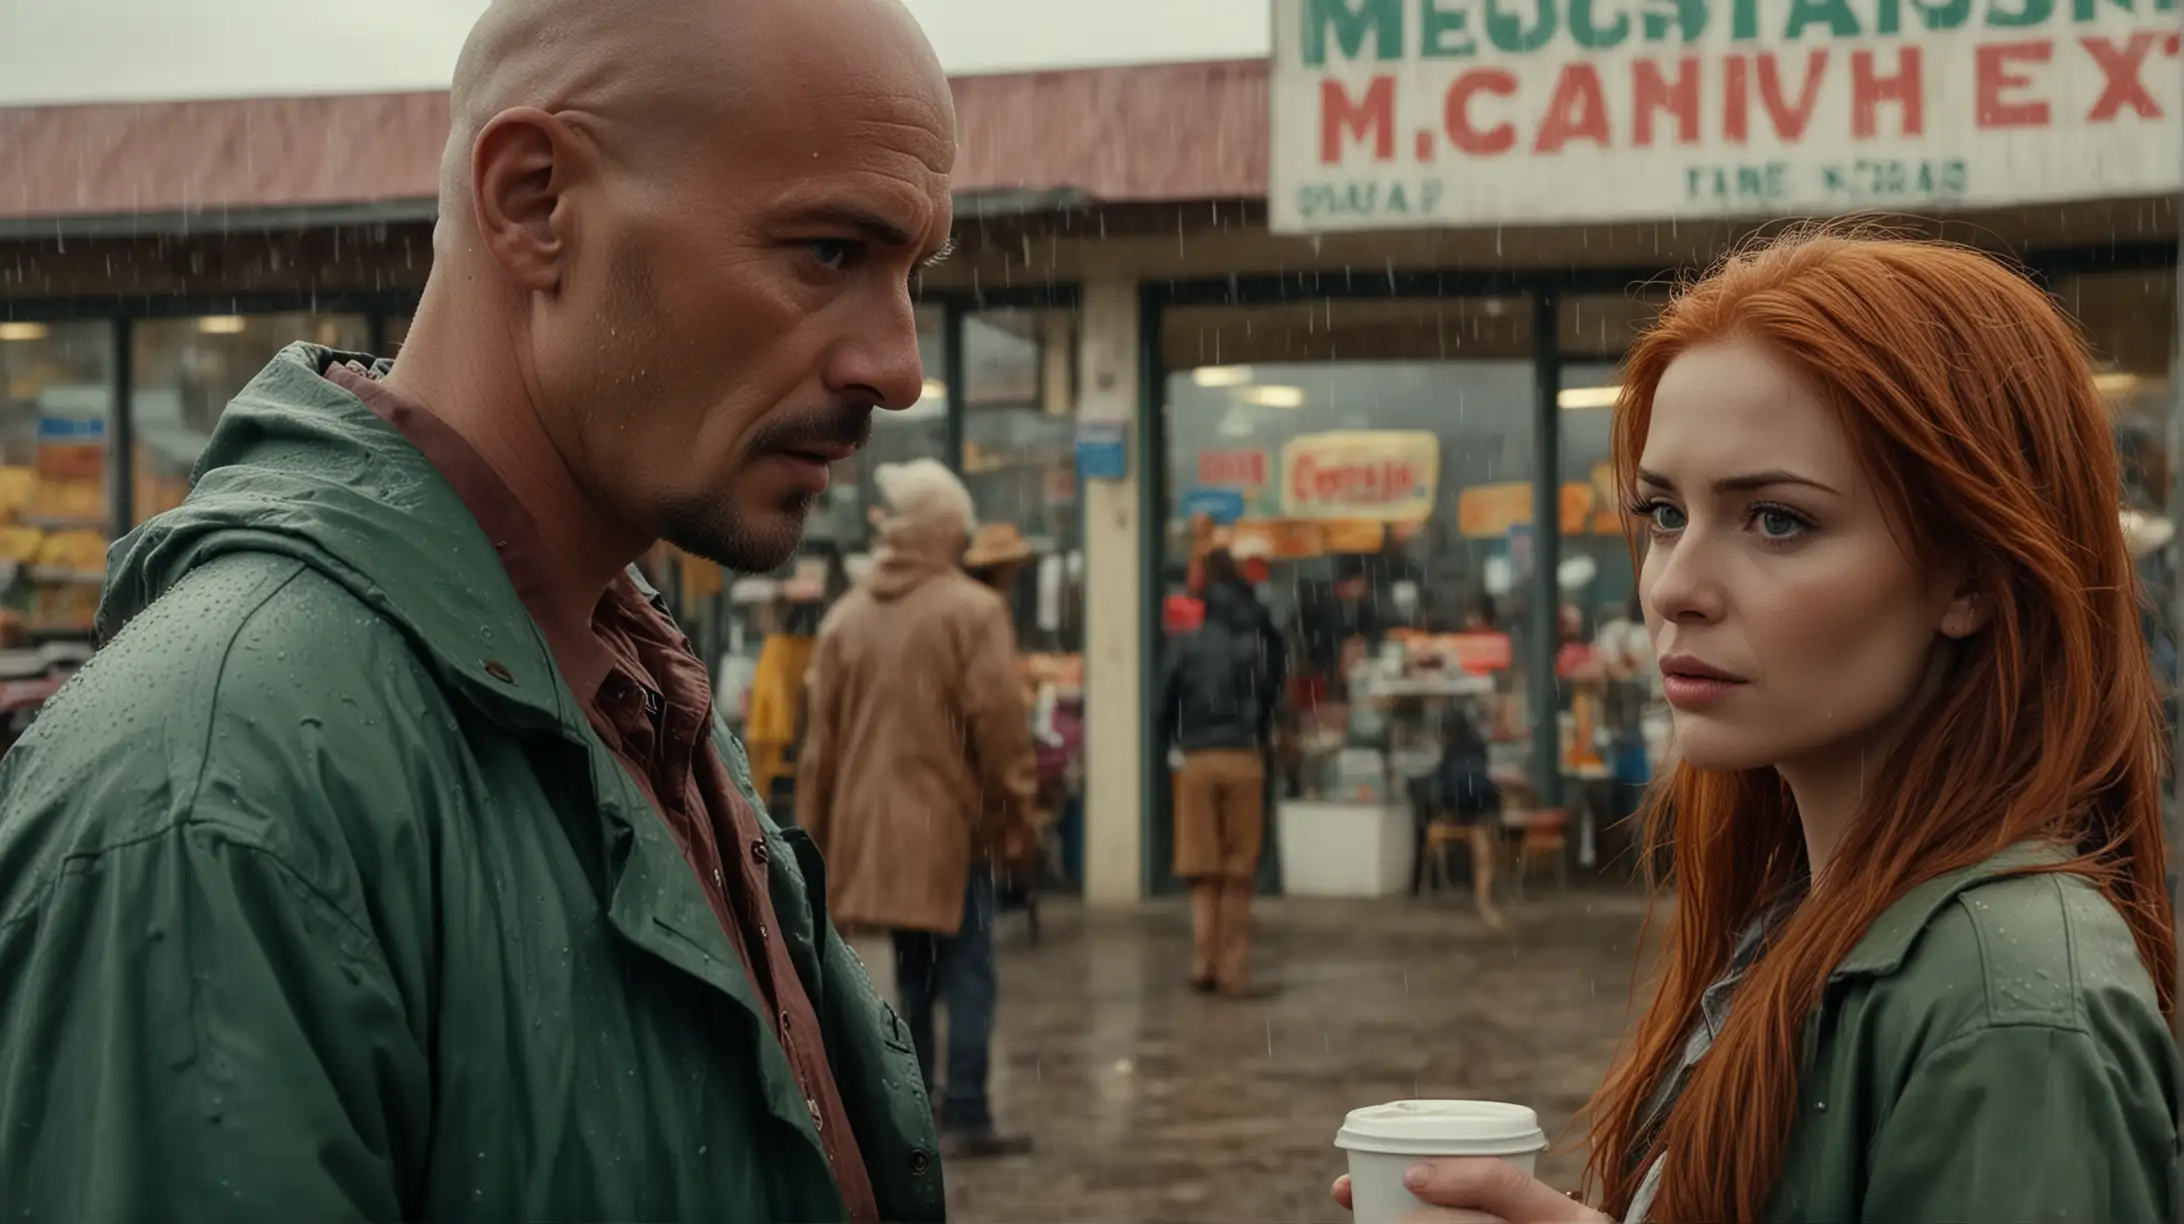 Wide shot cinematic. In a country western convenience store (reminiscent of FROM DUSK TILL DAWN), a beautiful woman of Scandinavian heritage, with blazing red hair and arctic blue eyes, wearing a dull green rain coat, with a beautiful hourglass figure, is standing next to a Mexican man. The Mexican man is about 40 years old completely bald and clean shaven, brown eyes wearing a white tee shirt. Mafiosi, he's brutal and looks like a bad guy. He's a head taller than her. Their faces are close-up, they look at each other. They both are holding coffee cups